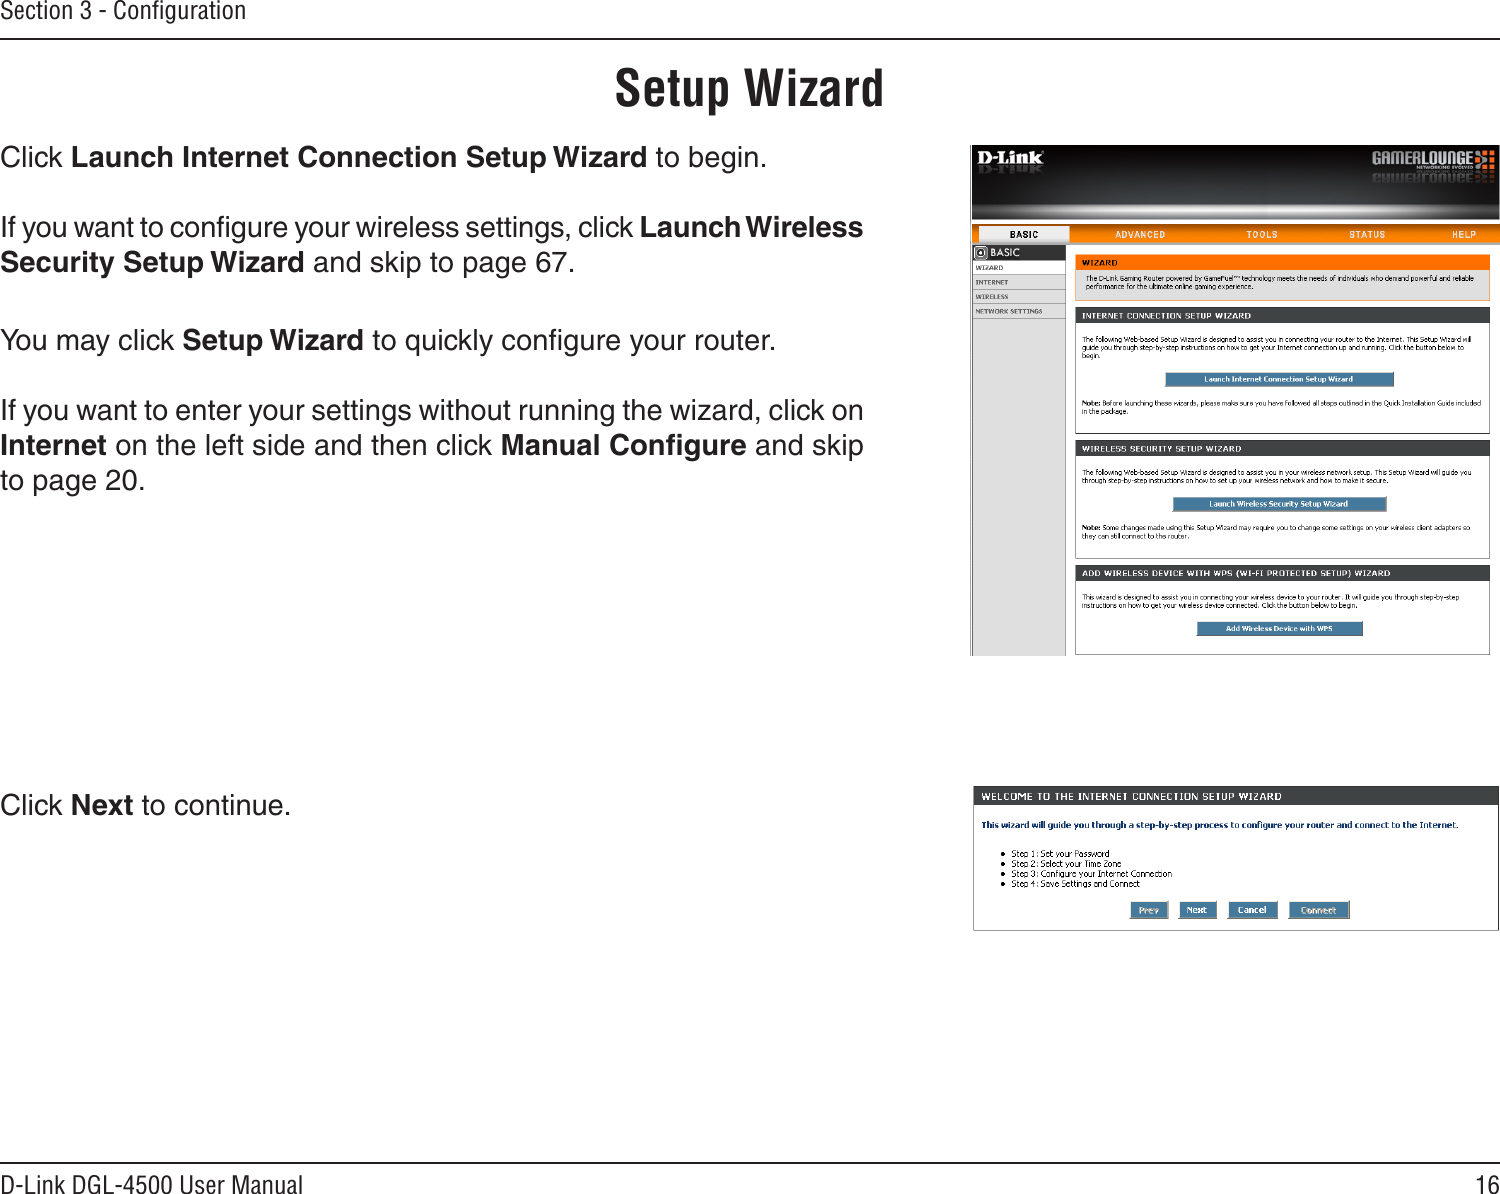 16D-Link DGL-4500 User ManualSection 3 - ConﬁgurationSetup WizardYou may click Setup Wizard to quickly conﬁgure your router.If you want to enter your settings without running the wizard, click on Internet on the left side and then click Manual Conﬁgure and skip to page 20.Click Launch Internet Connection Setup Wizard to begin.If you want to conﬁgure your wireless settings, click Launch Wireless Security Setup Wizard and skip to page 67.Click Next to continue.